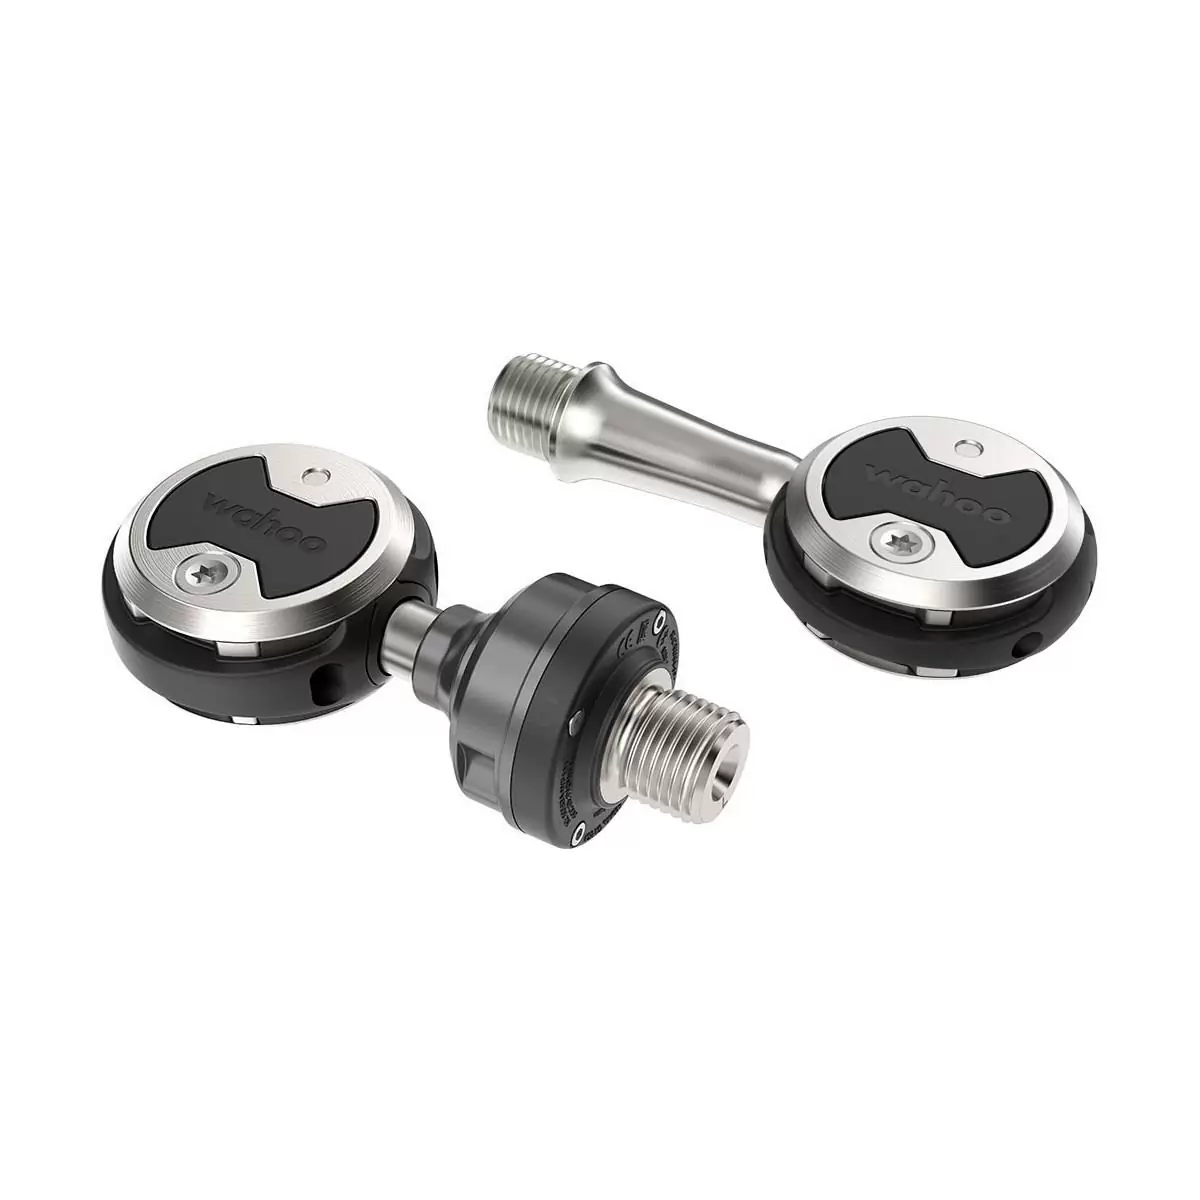 Powrlink Zero Left Sided Power Pedals - image